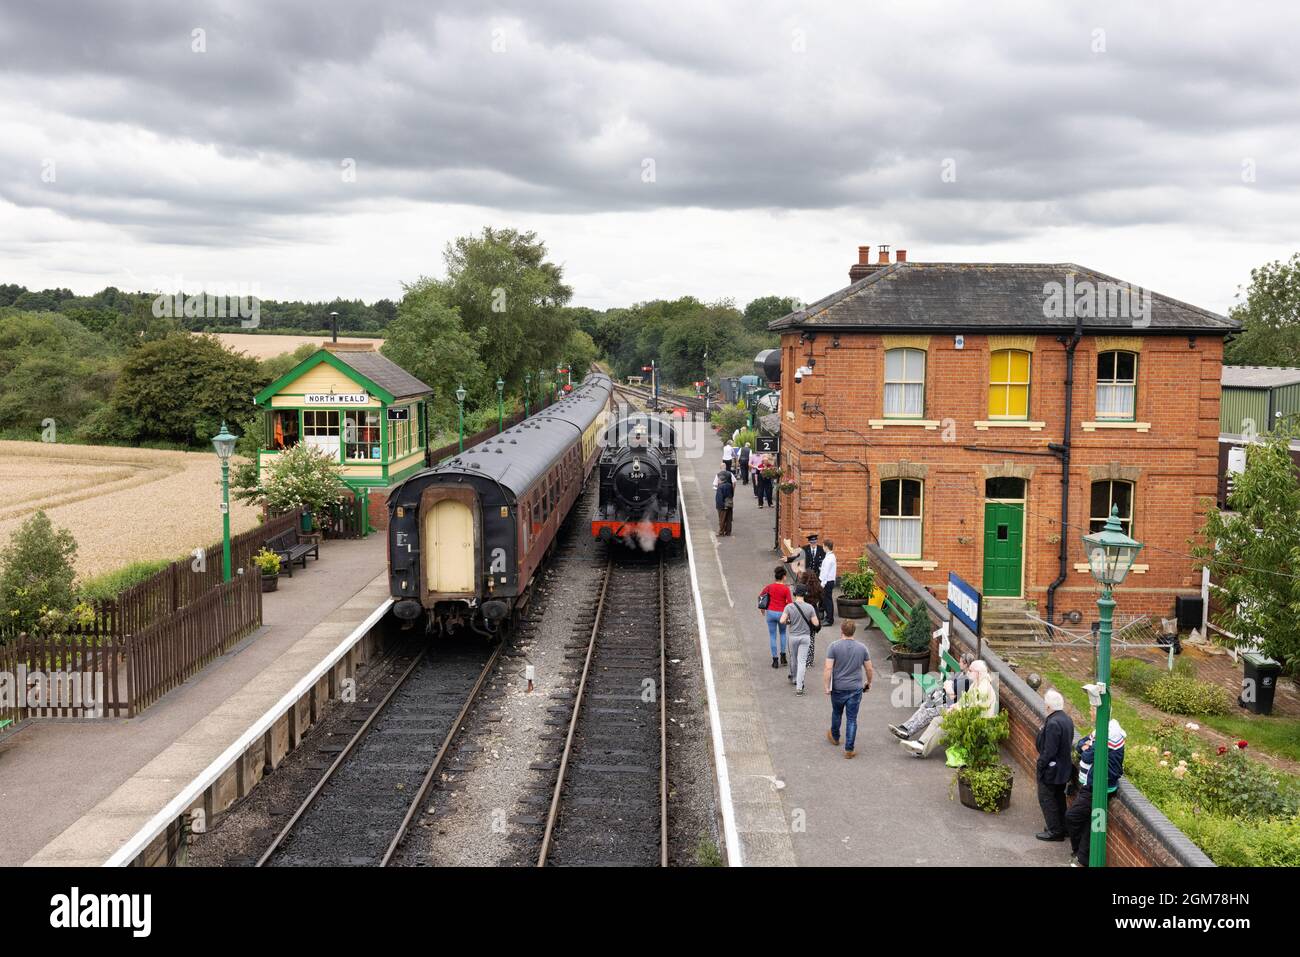 Steam train UK - a steam engine and carriages at the platform, North Weald Station - On the Epping - Ongar railway, a vintage railway, Essex UK Stock Photo